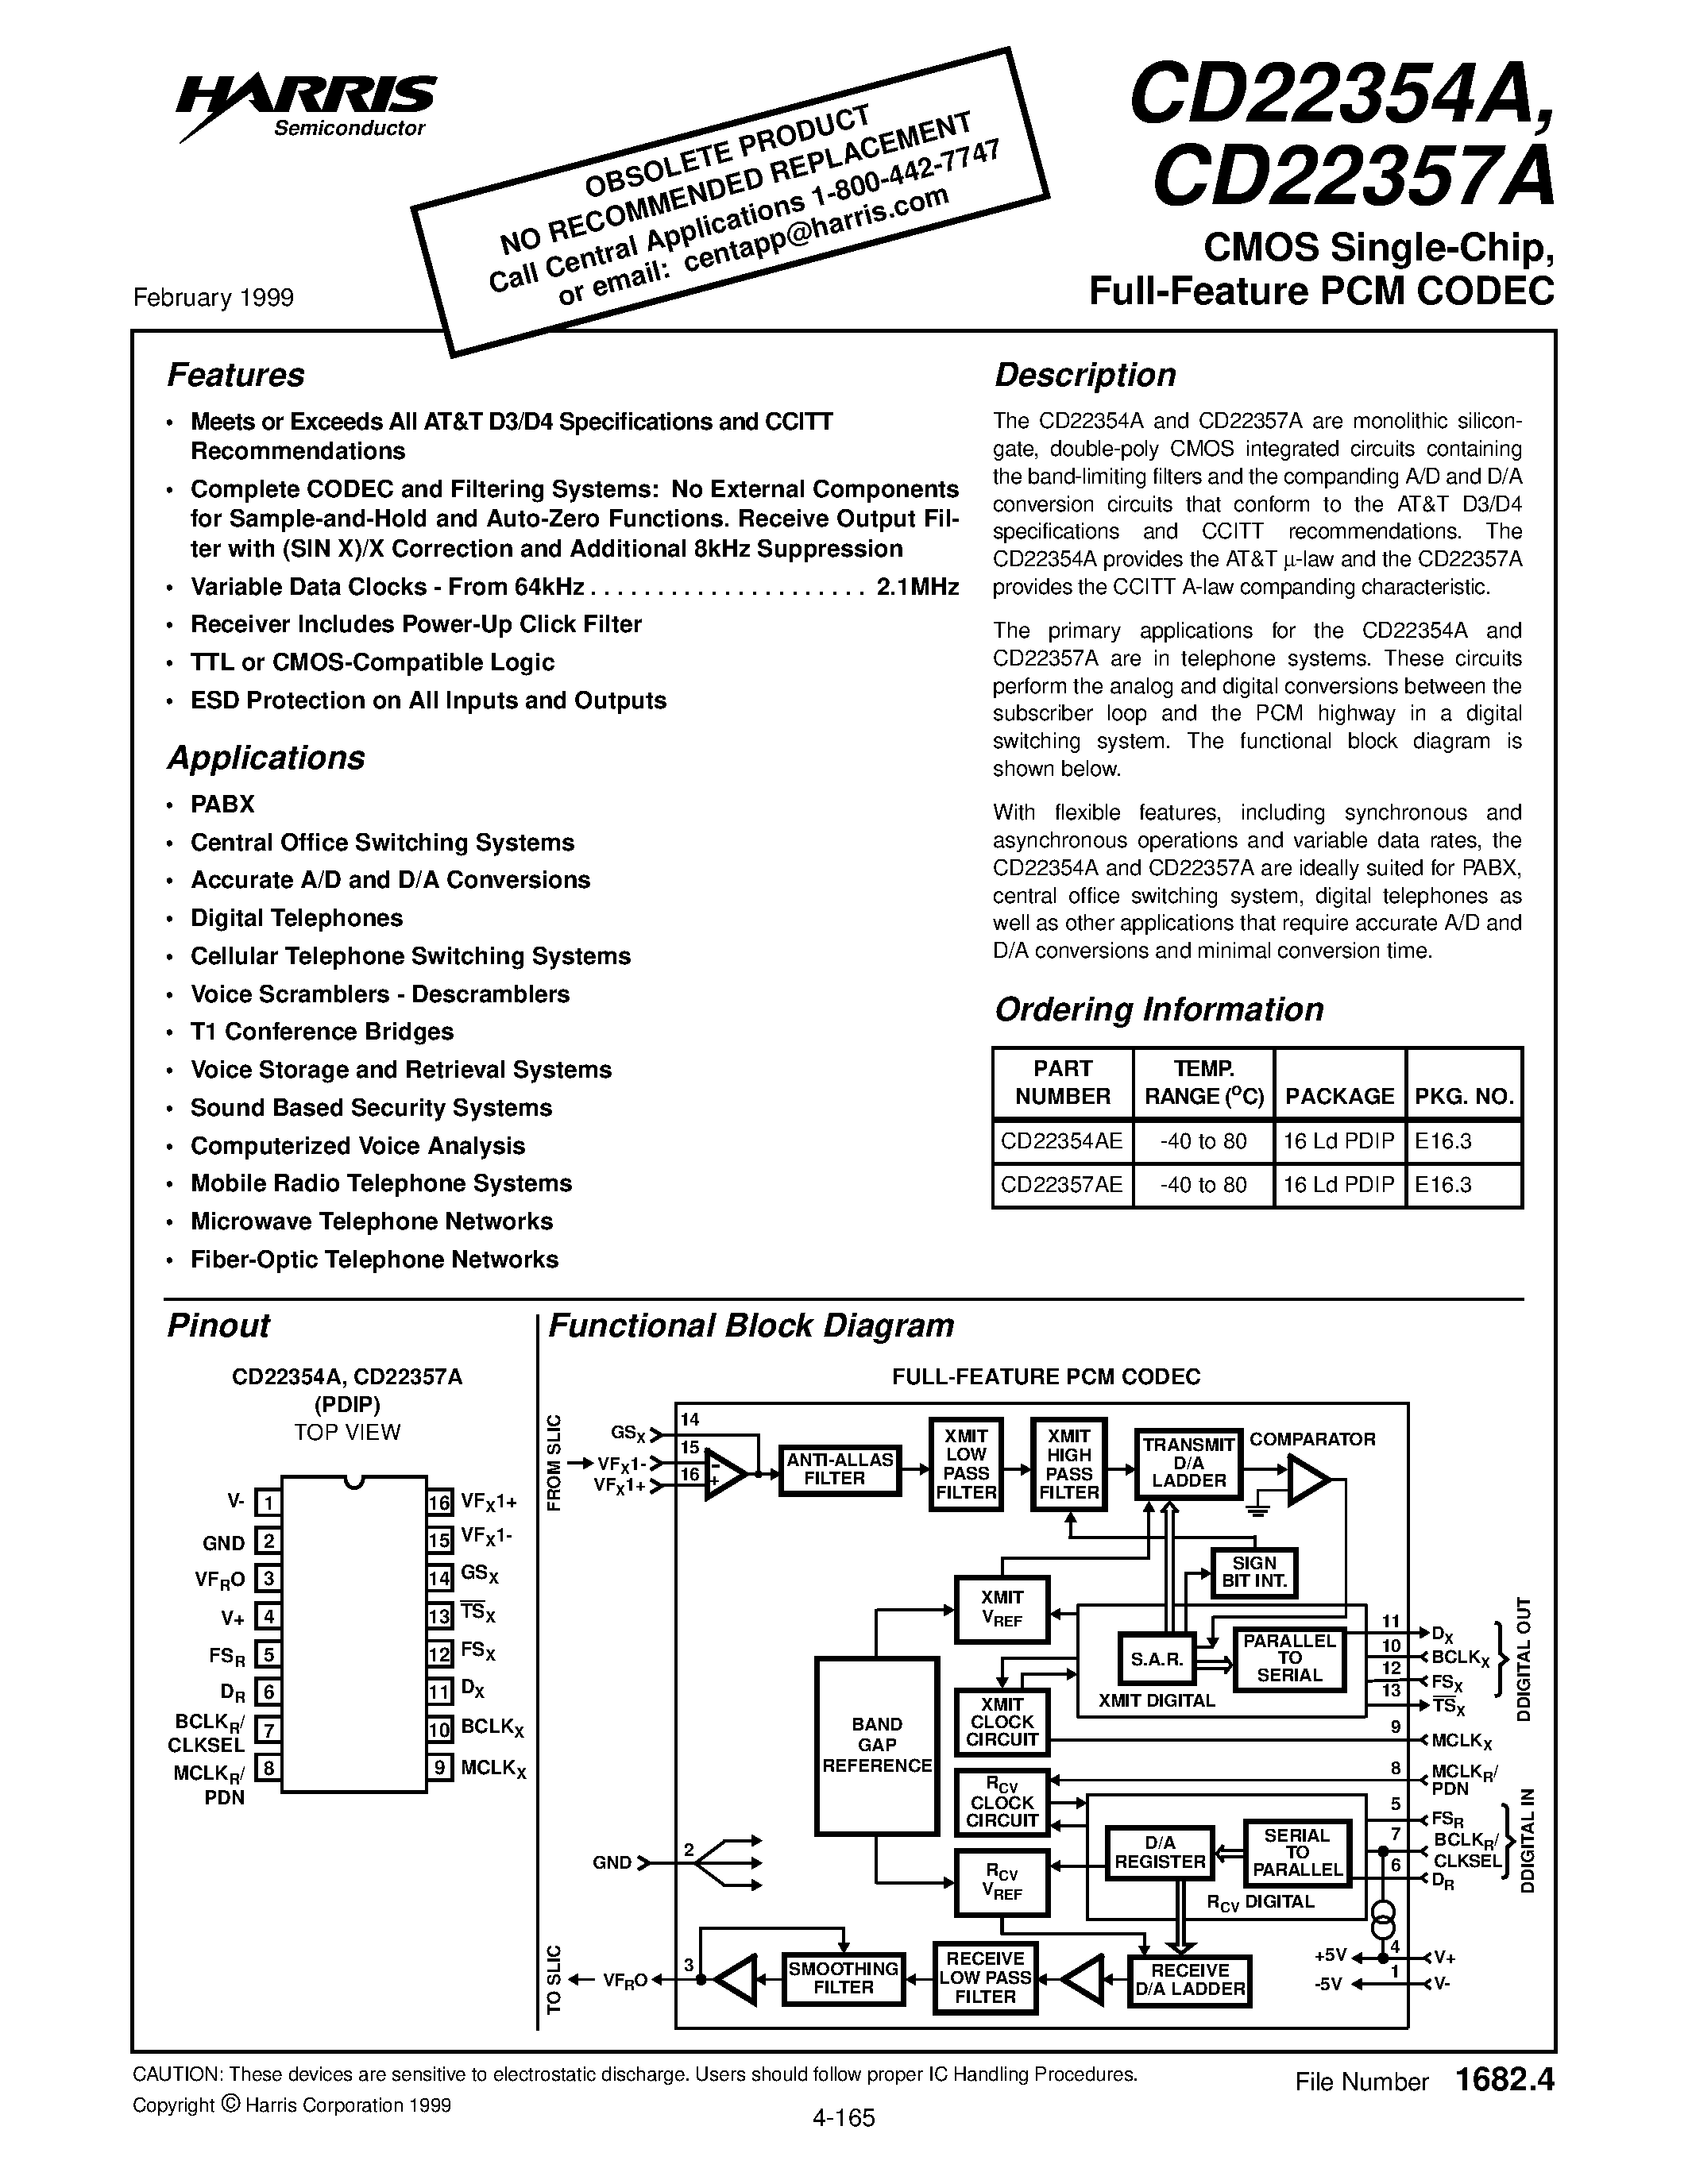 Даташит CD22357AE - CMOS Single-Chip/ Full-Feature PCM CODEC страница 1